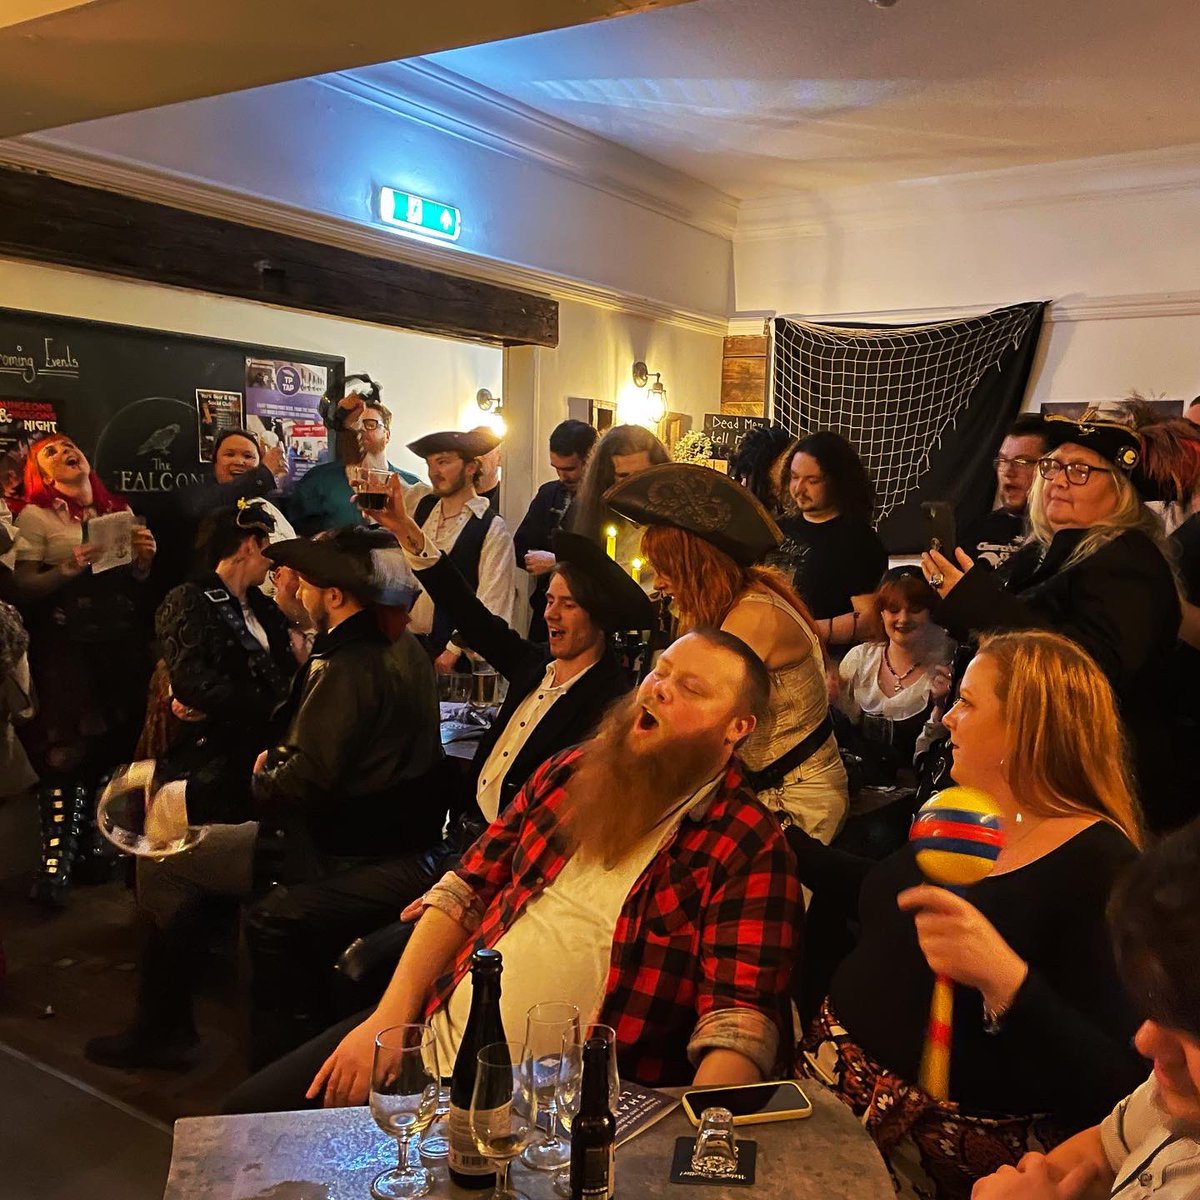 We had an amazing night last night with the pirate crew at @thefalconyork 🏴‍☠️

There was plenty of rum drunk and many good songs shared!! Thank you to everyone who came out and made this event a success! 

Be sure to follow us to keep up to date on the next one…. 😉